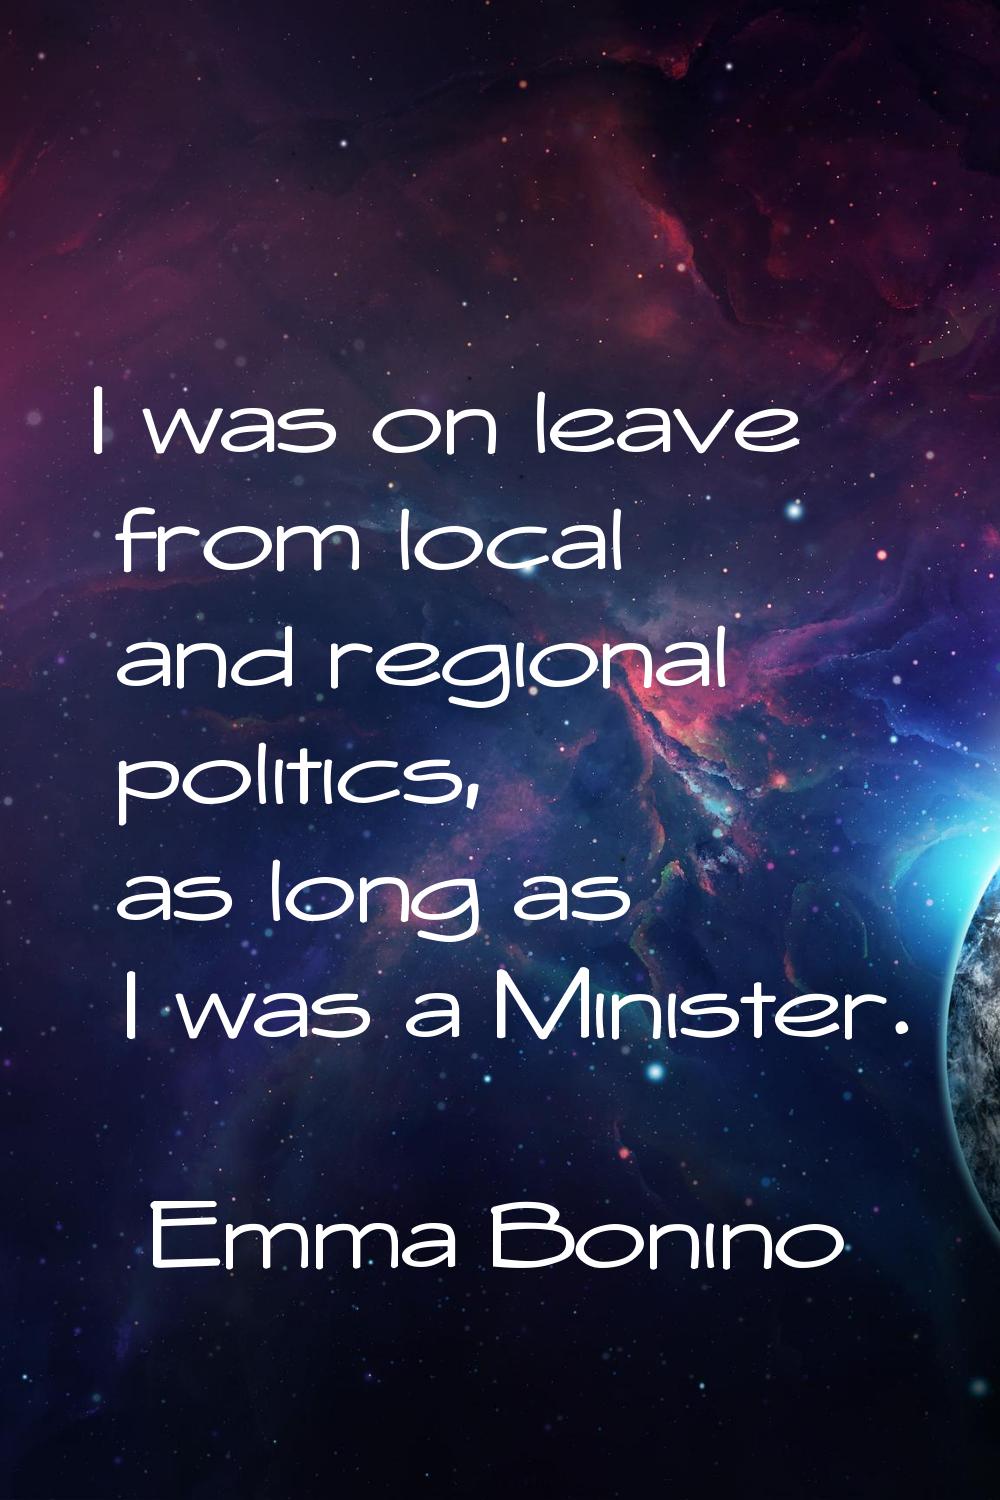 I was on leave from local and regional politics, as long as I was a Minister.